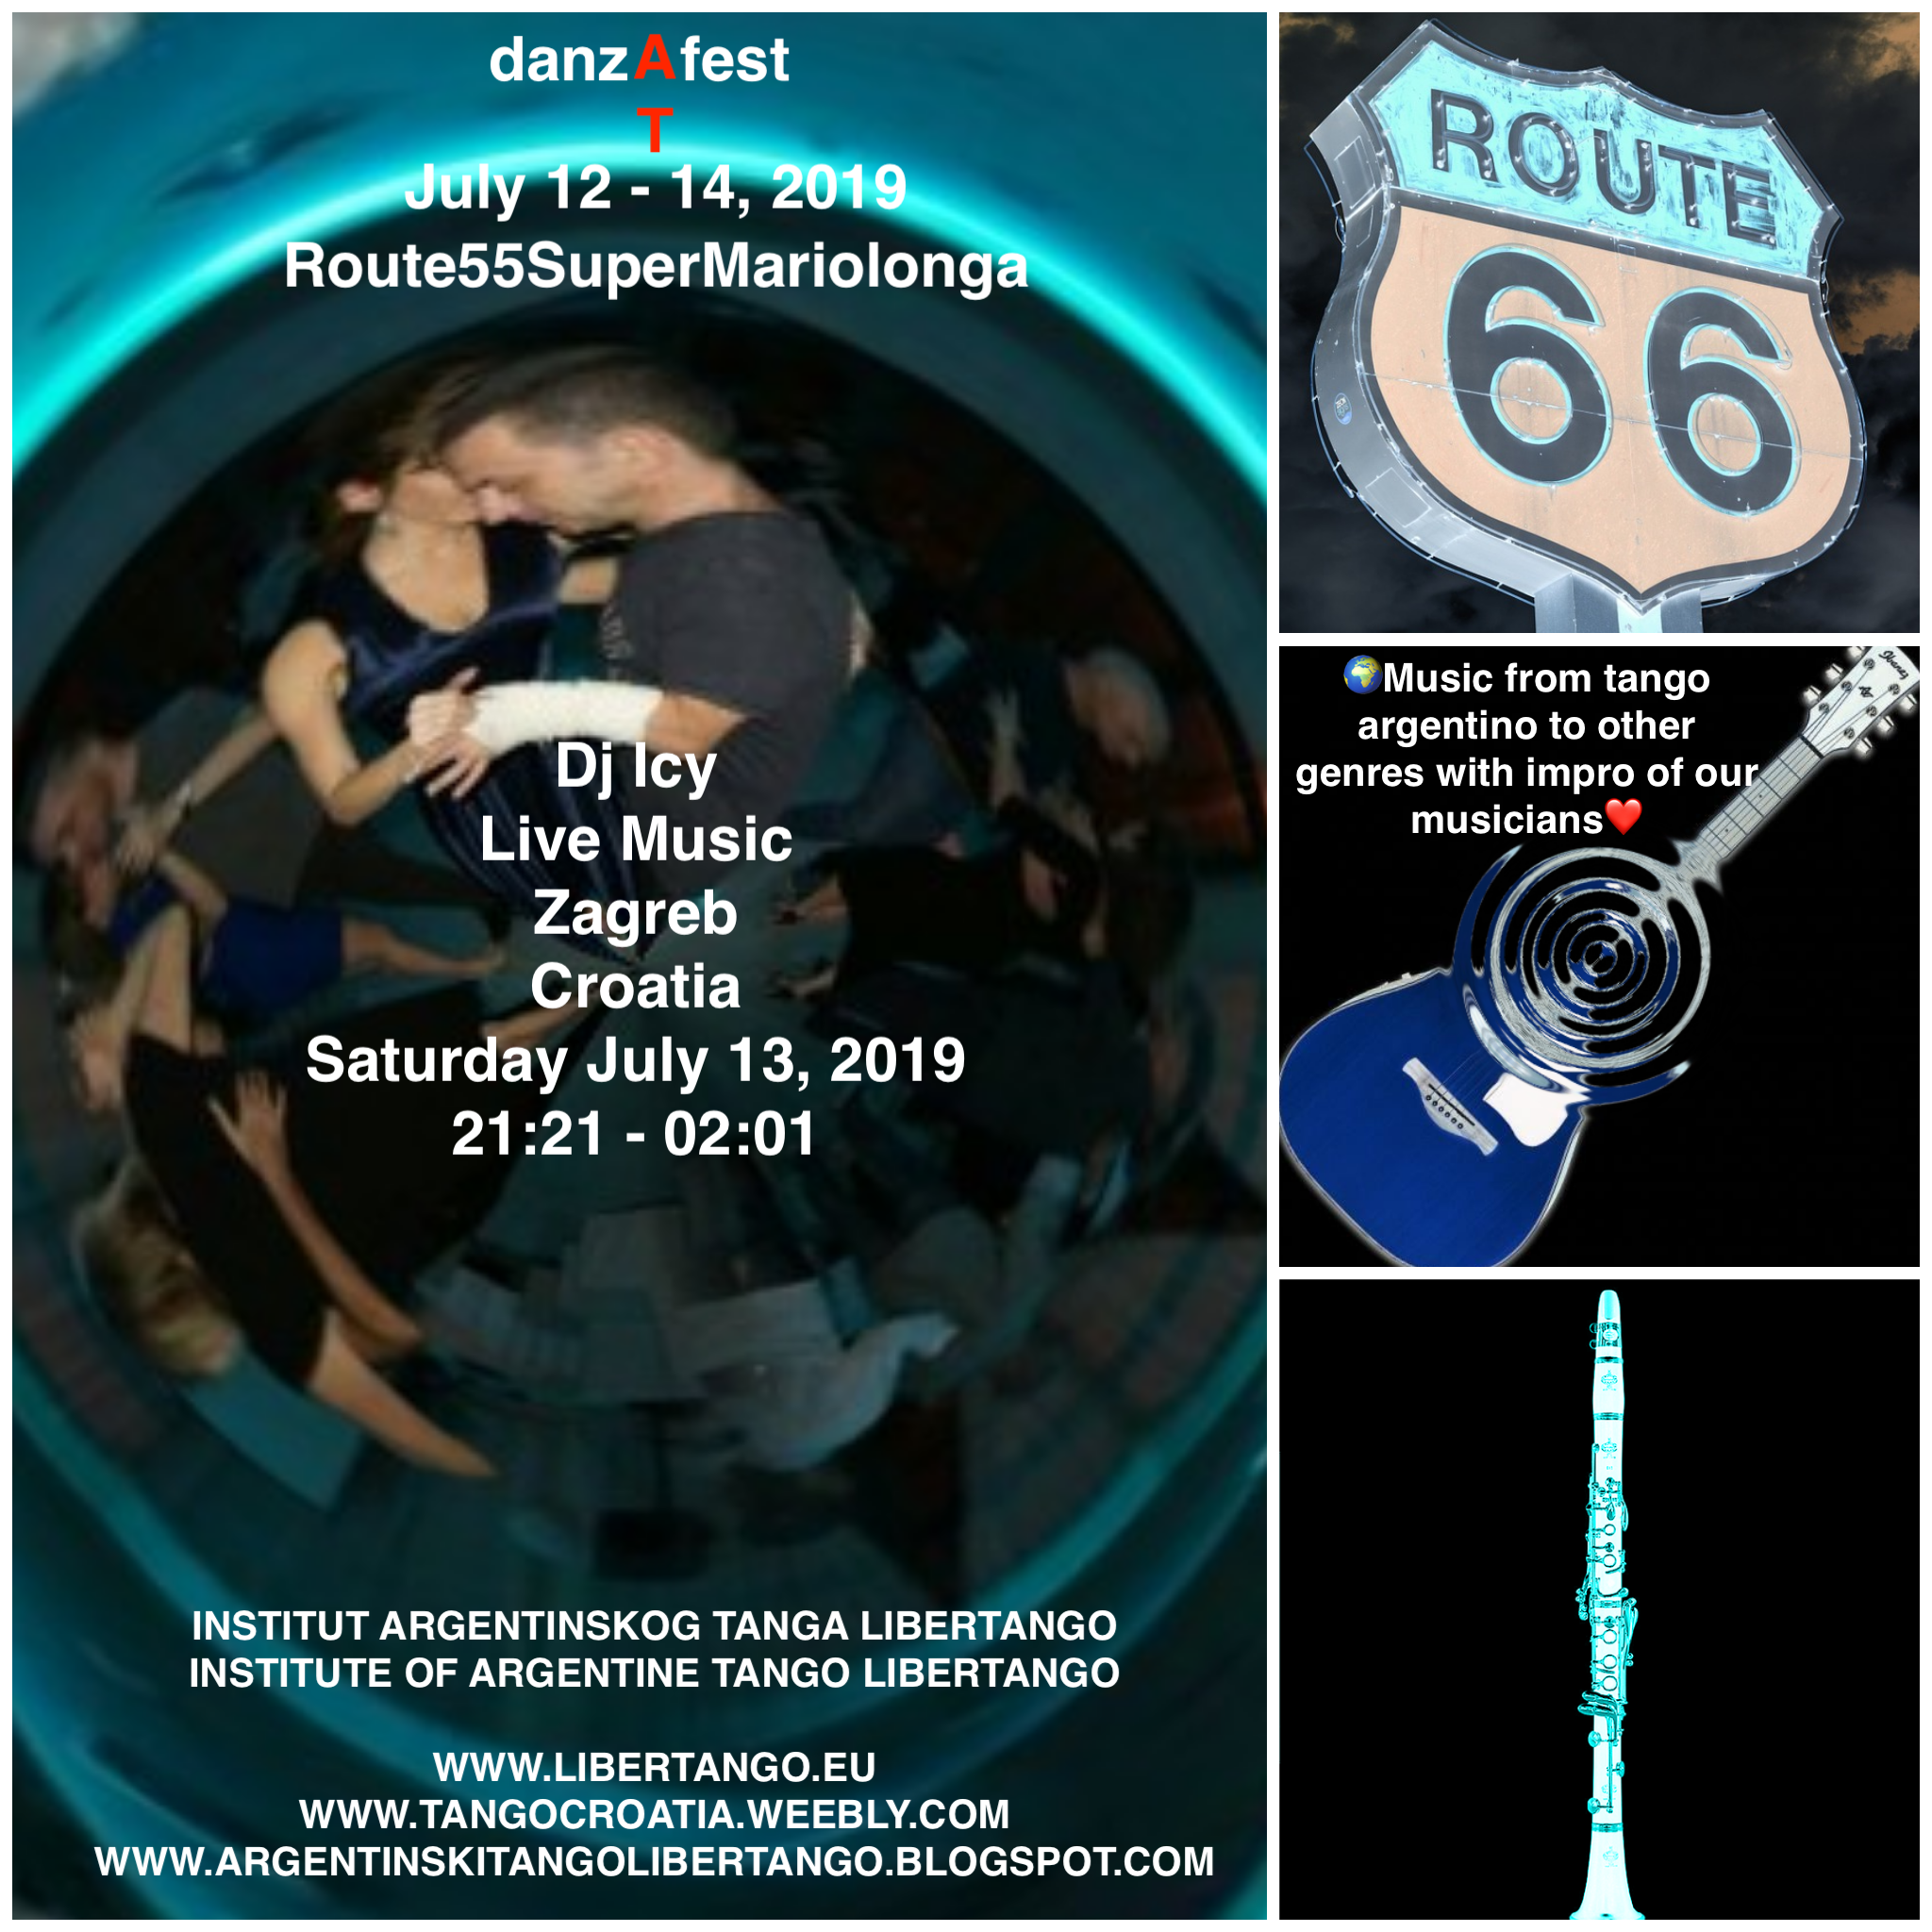 Route55SuperMariolonga special  milonga WITH LIVE MUSIC and dj Icy.  On DanzATfest July 13, 2019.  Music from tango argentino to other genres with impro of our musicians  Eduard Kobescak and Marko Vukmirović. Mjesni odbor - Voćarska cesta 71 Zagreb, Croatia.